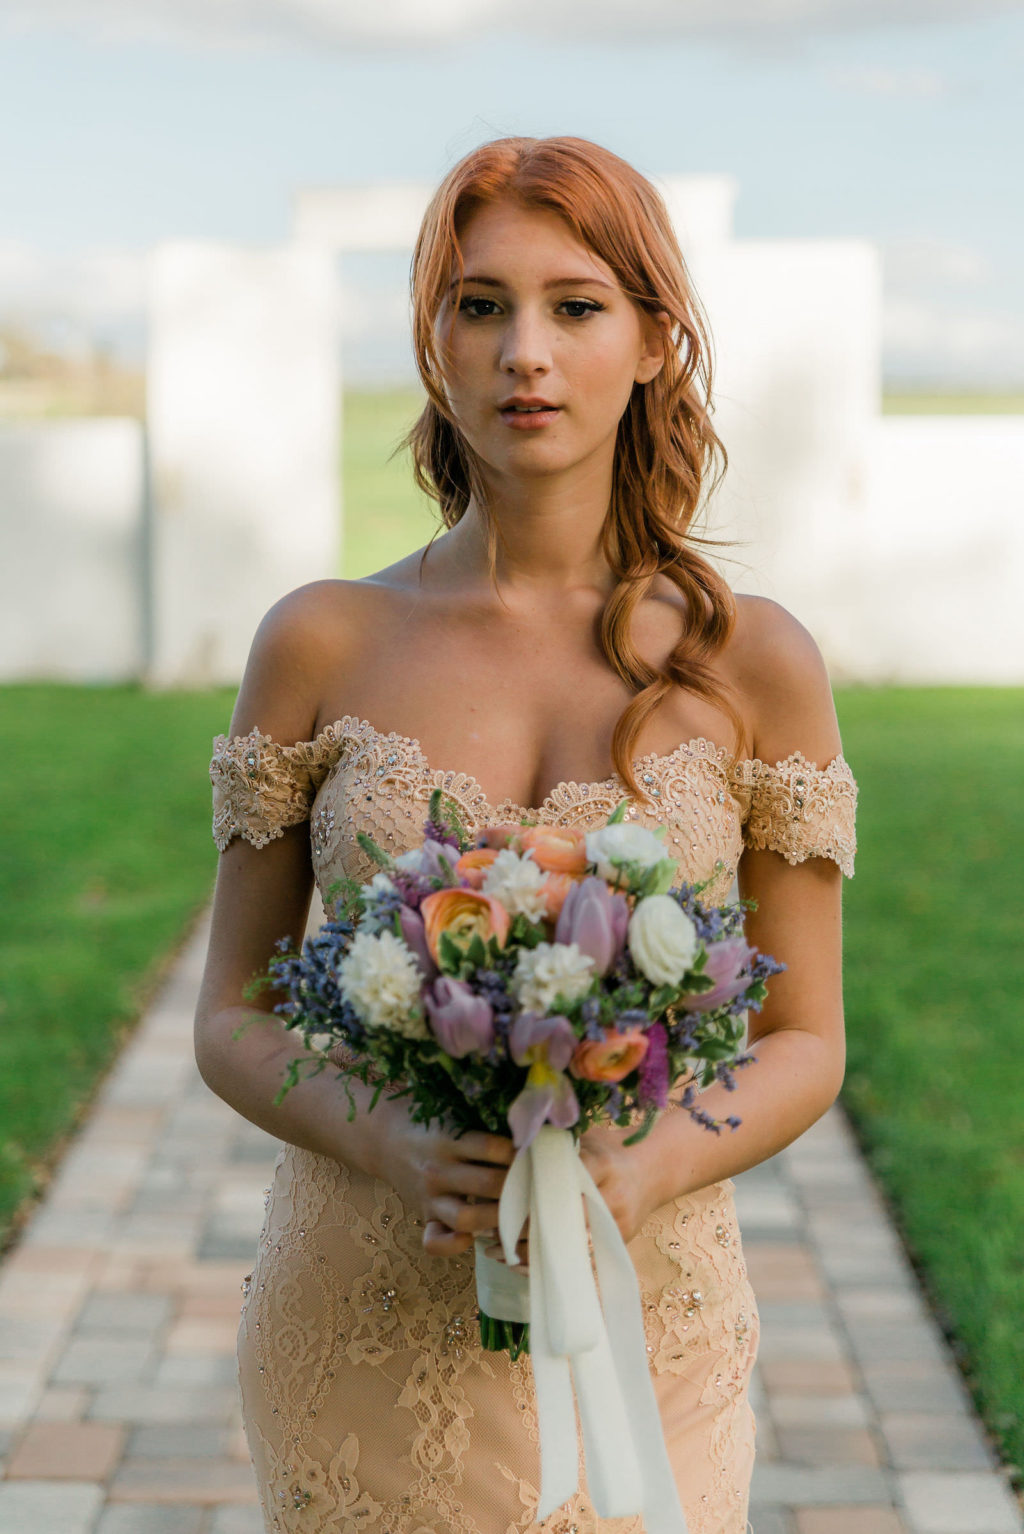 Vintage Bride in Off the Shoulder Fitted Lace Wedding Gown | Arden Bridal and Boutique Tampa | Pastel White, Purple, and Peach Floral Bouquet with Greenery